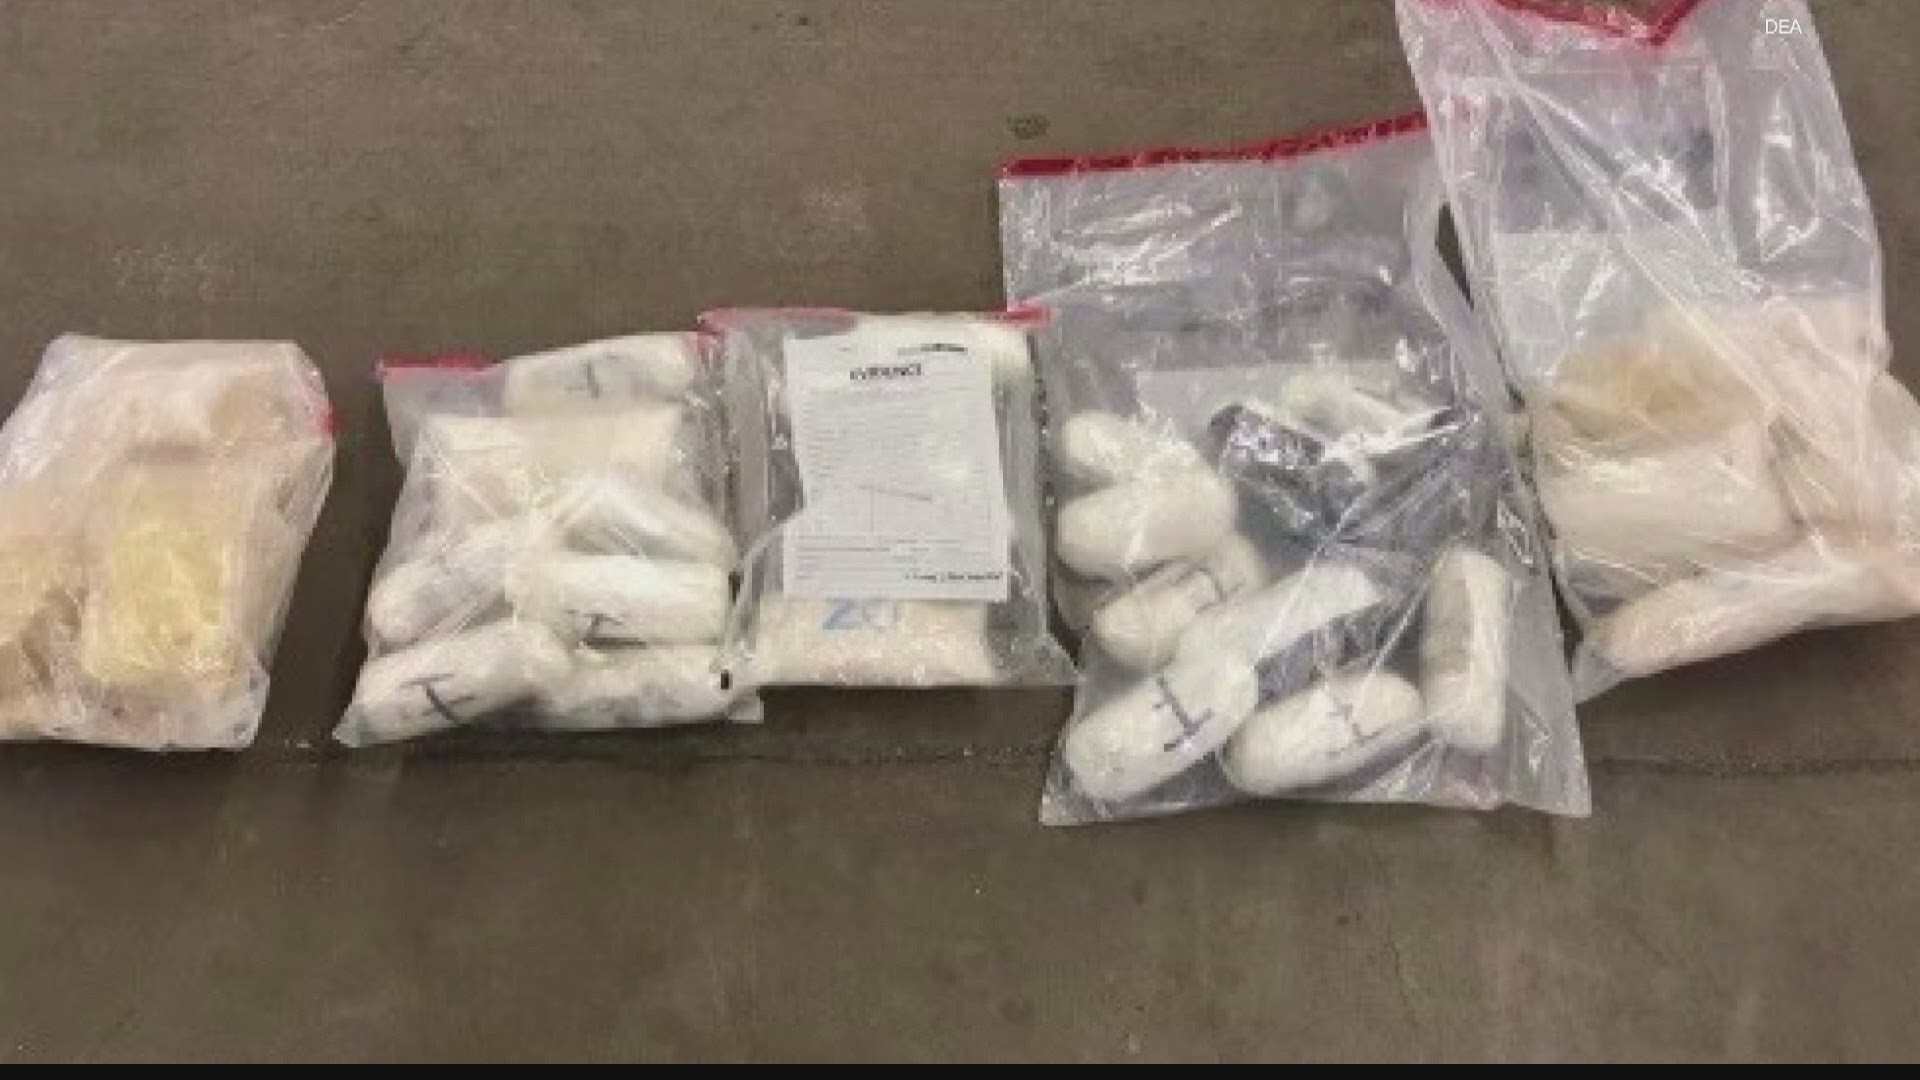 Federal prosecutors say a major drug trafficking ring has been dismantled in Bartholomew County.